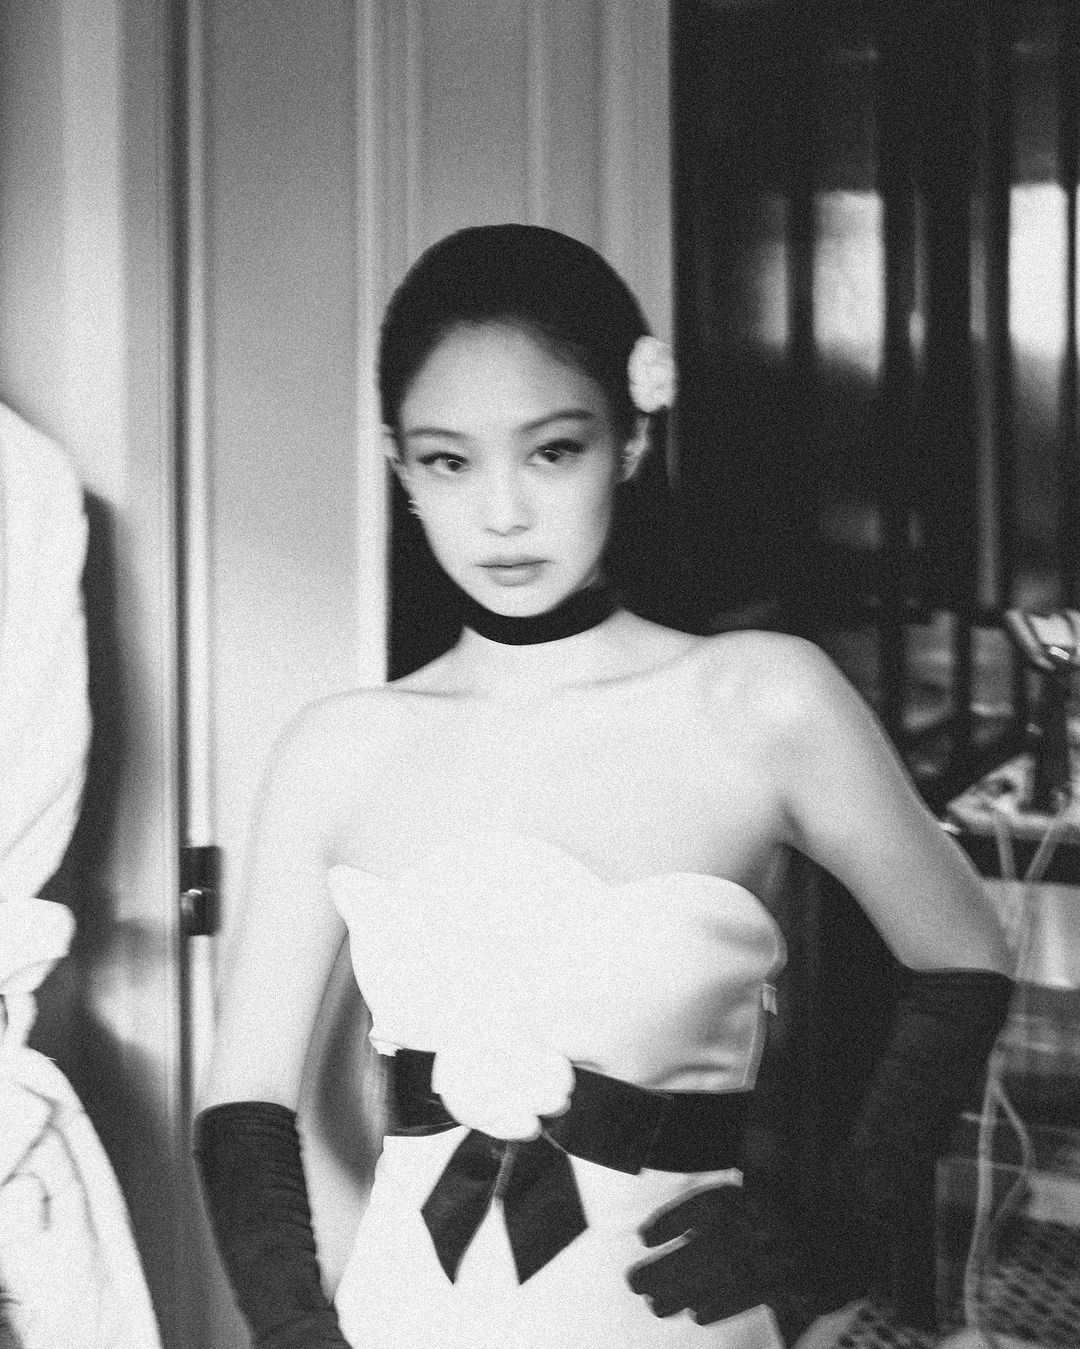 Blackpink's Jennie Attends First Met Gala in '90s Chanel Dress: Photos